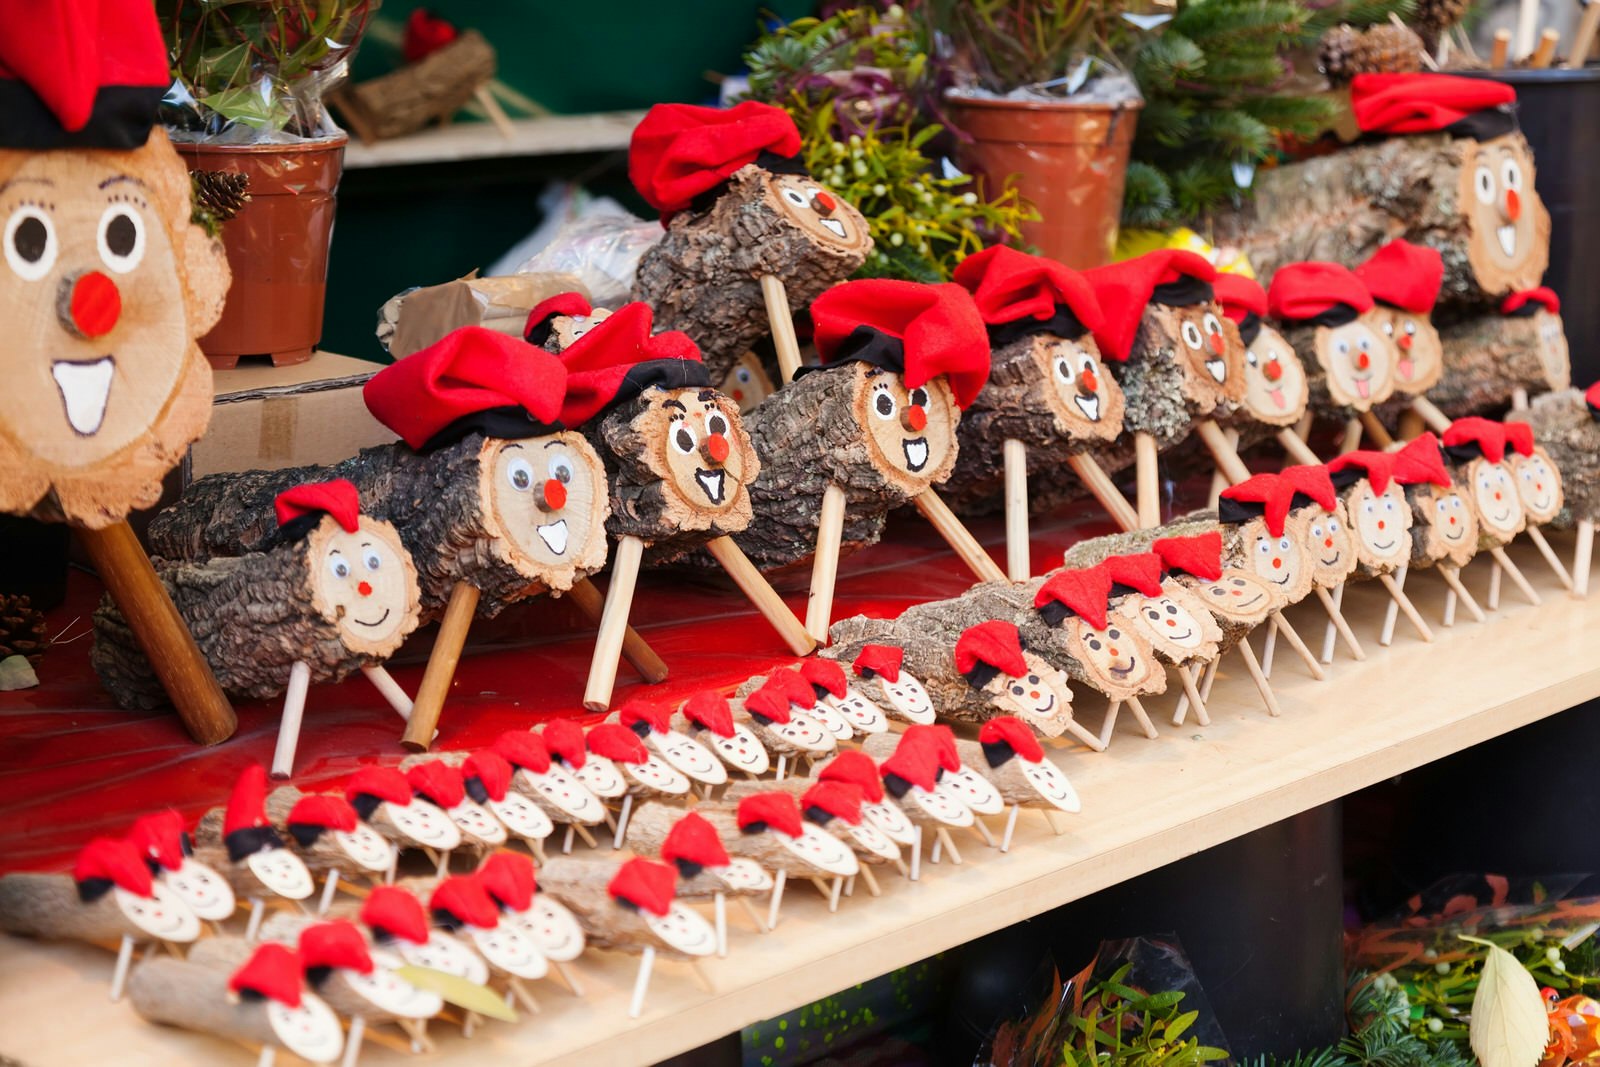 A display of wooden Tio de Nadal (Christmas logs), which is a character in Catalan mythology relating to Christmas tradition.